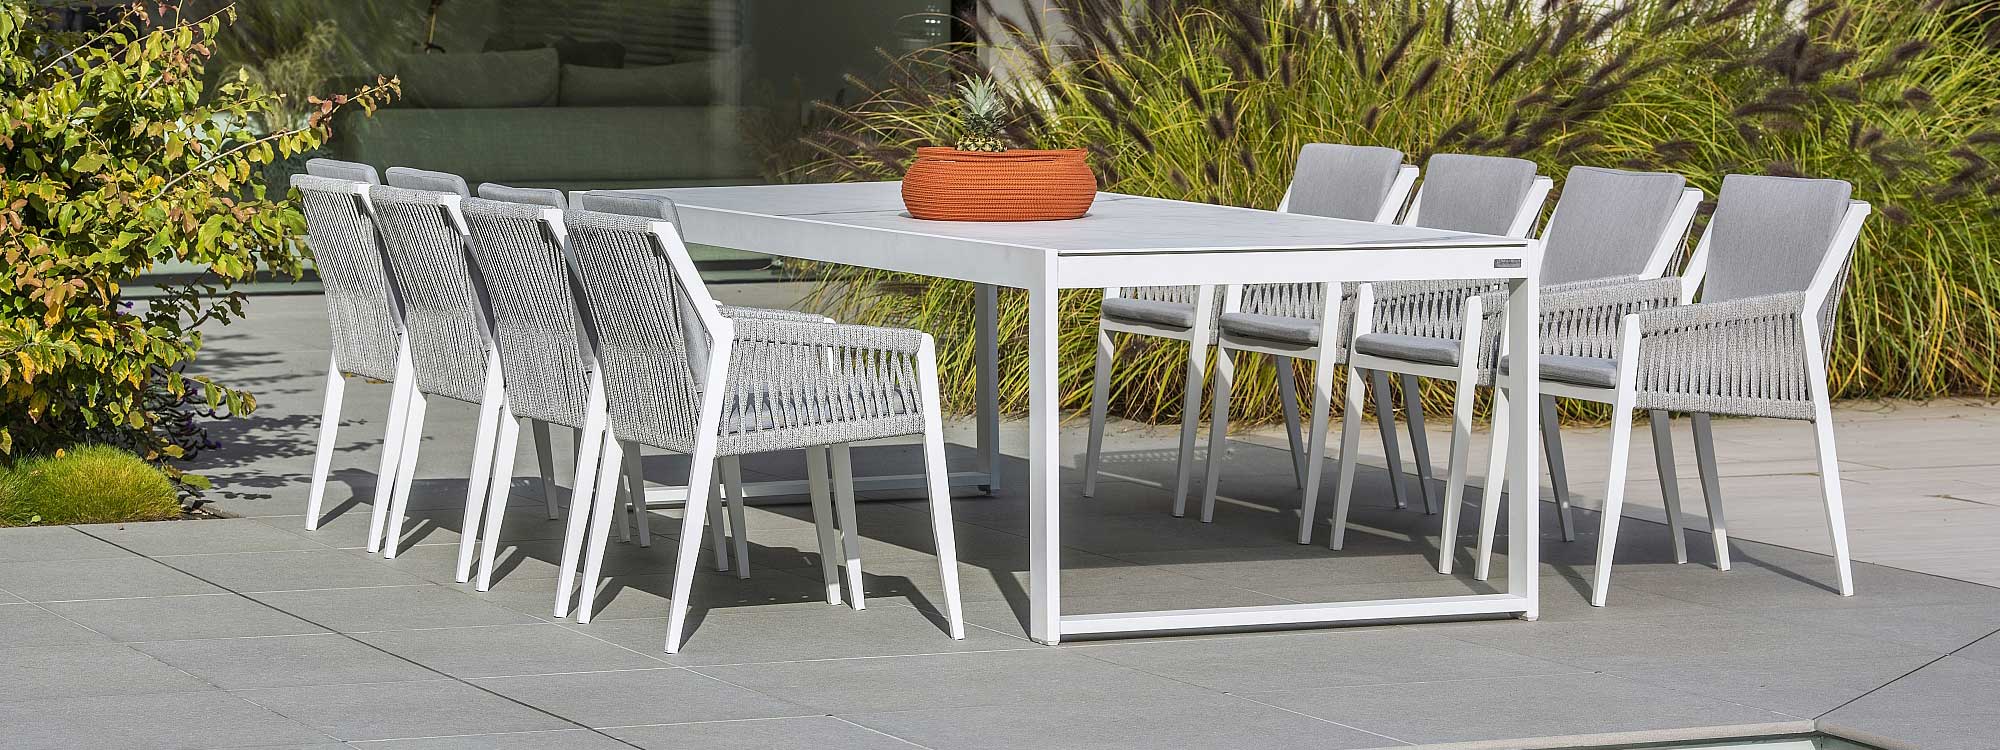 Image of closed Vigo XL white extending garden table with 8 white Ritz contemporary outdoor chairs by Jati & Kebon